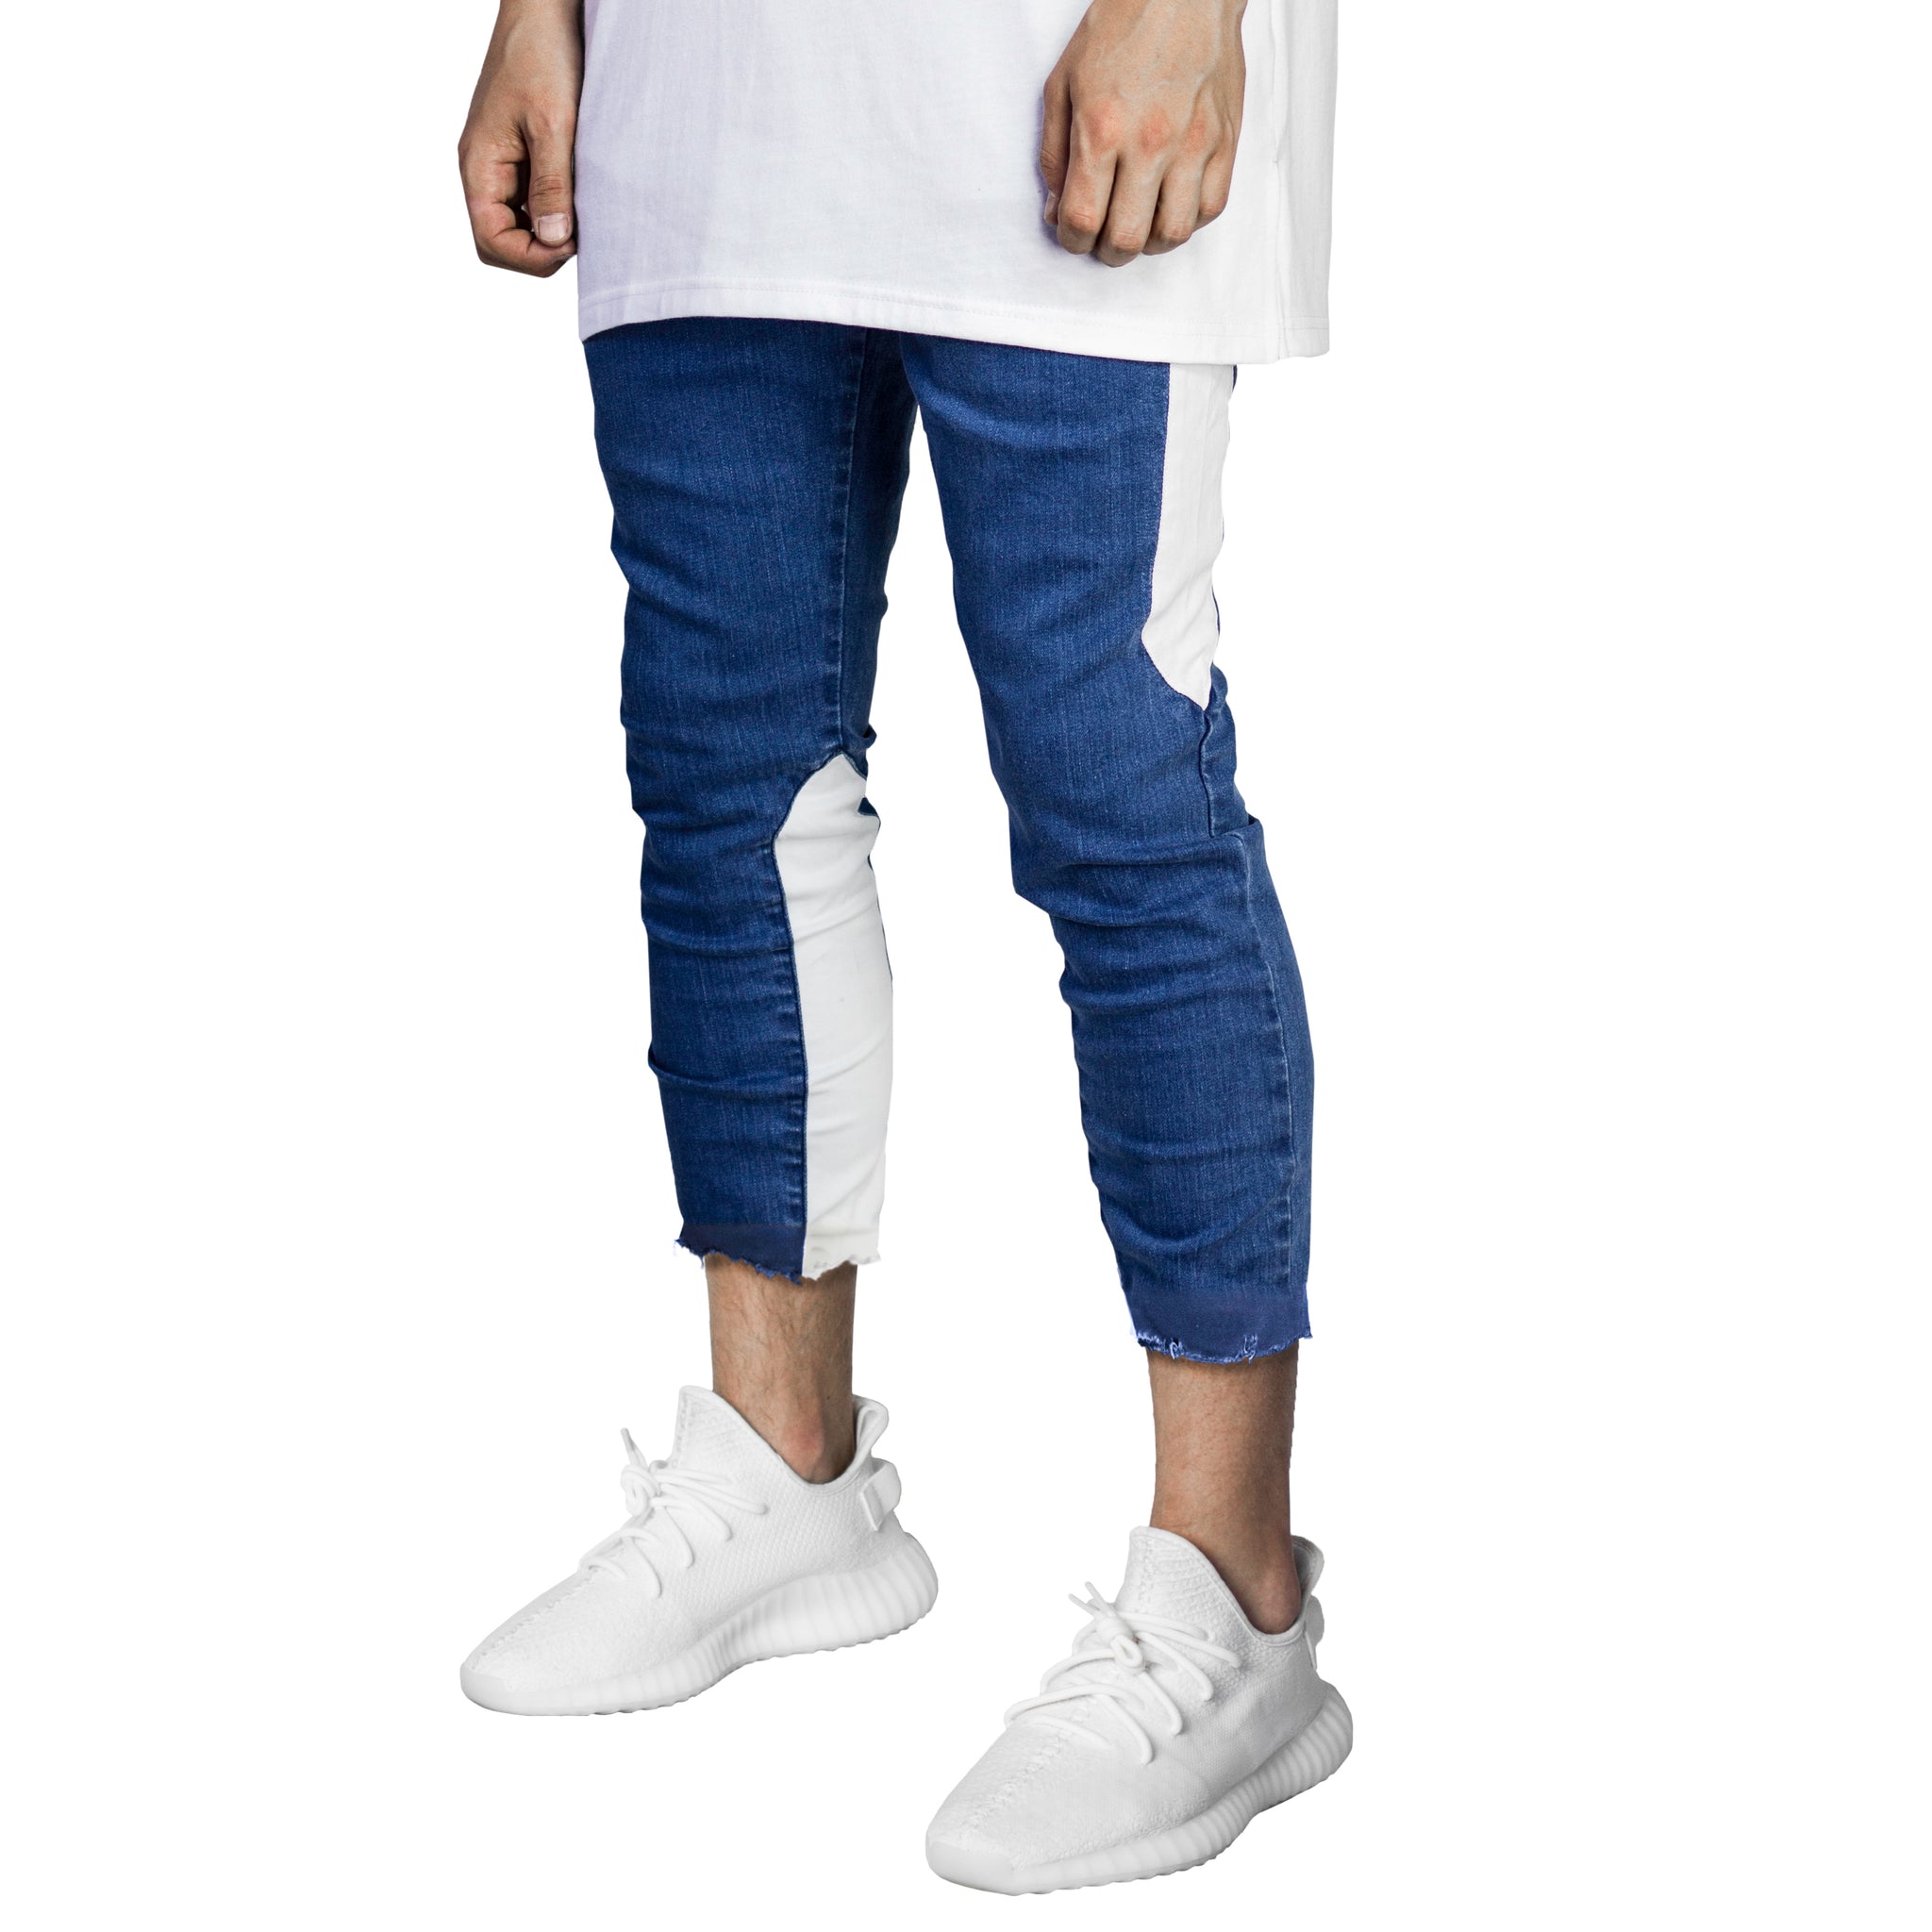 Cropped Spear Jeans : Blue/White